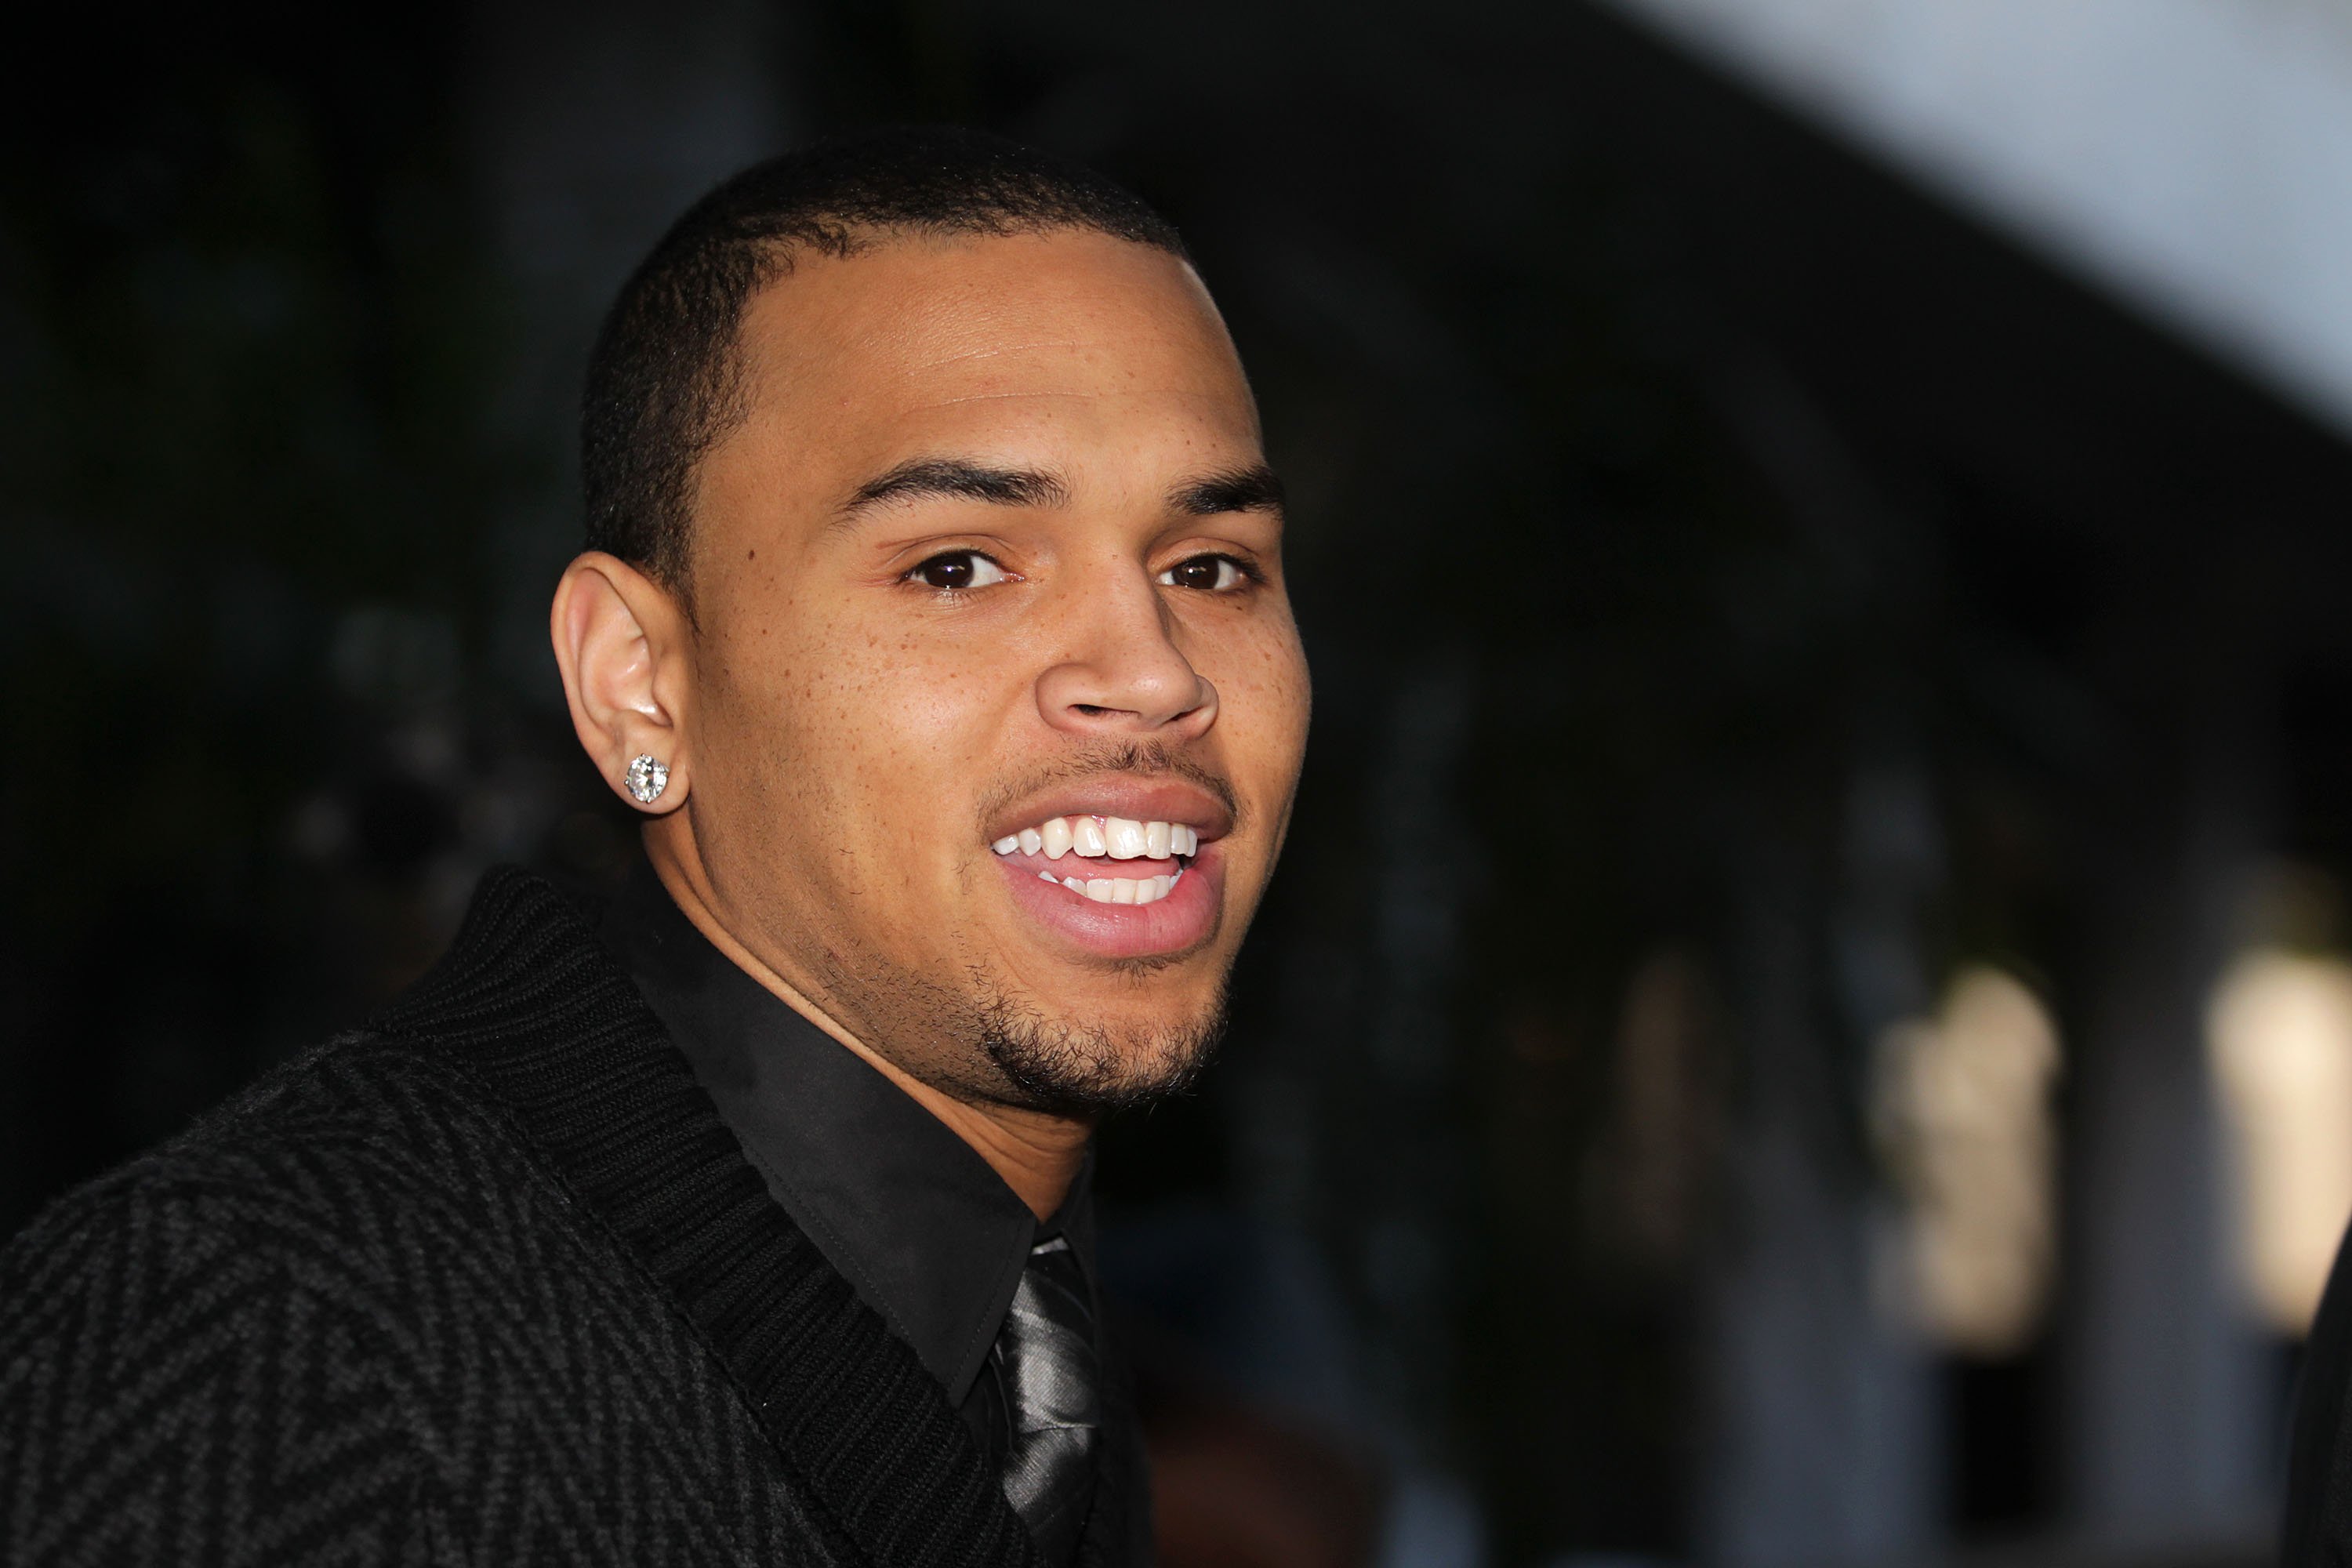 Chris Brown leaving the Los Angeles courthouse after a probation progress hearing in January 2011. | Photo: Getty Images